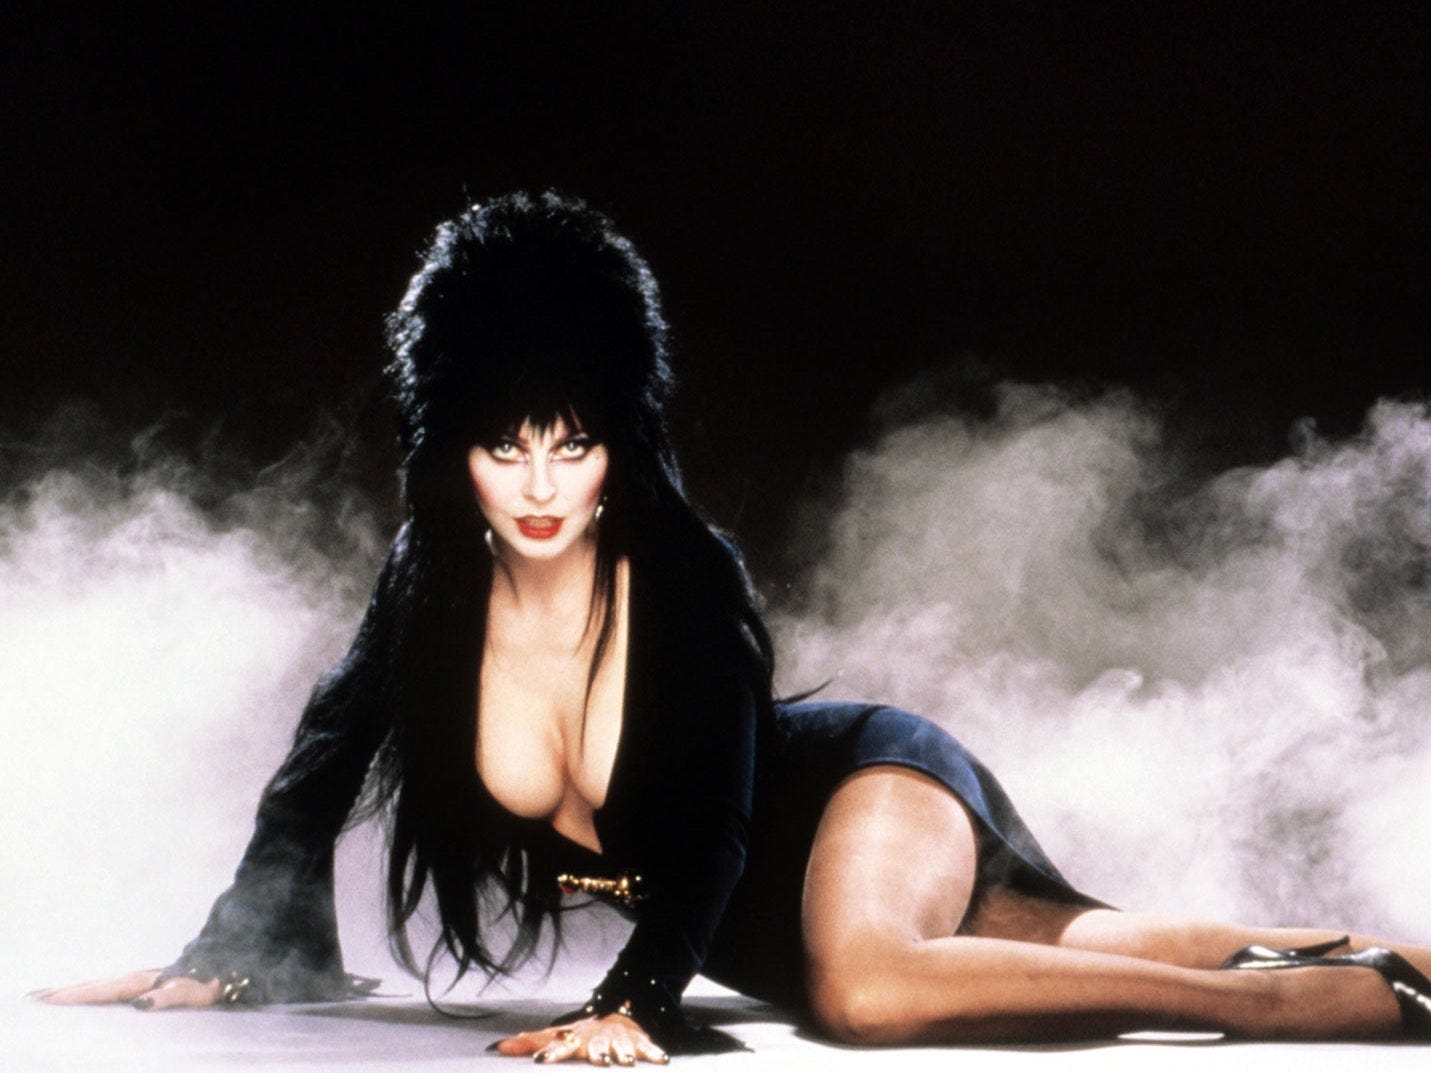 Let Elvira Teach You A Thing Or Two About Camp | them.